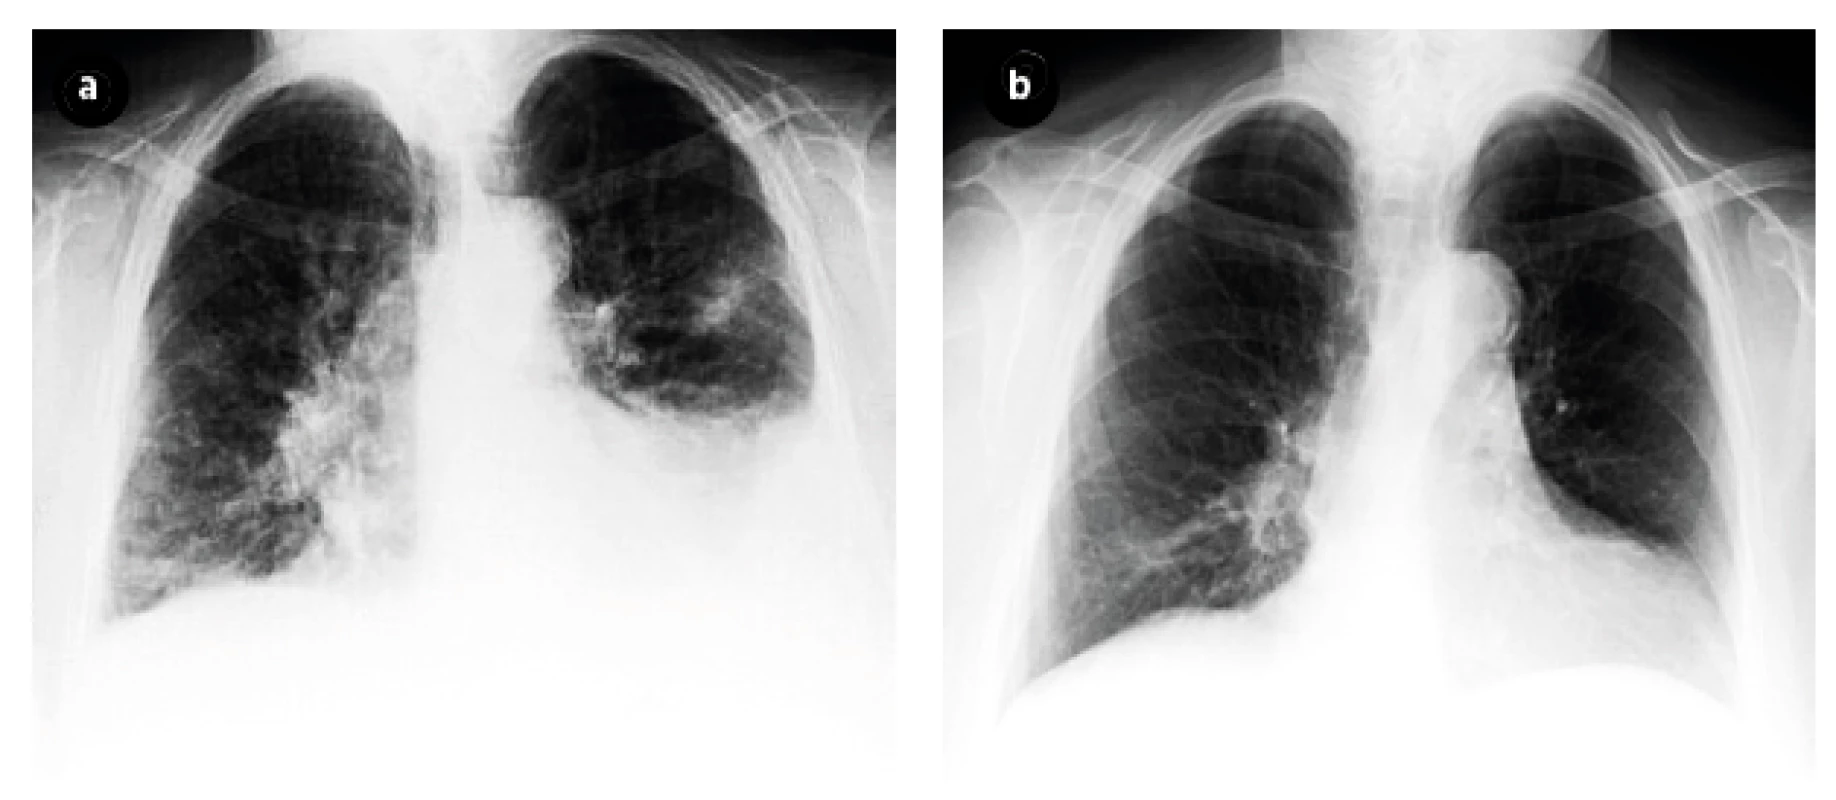 Chest X-Ray before (Figure 2a) and after (Figure 2b) treatment